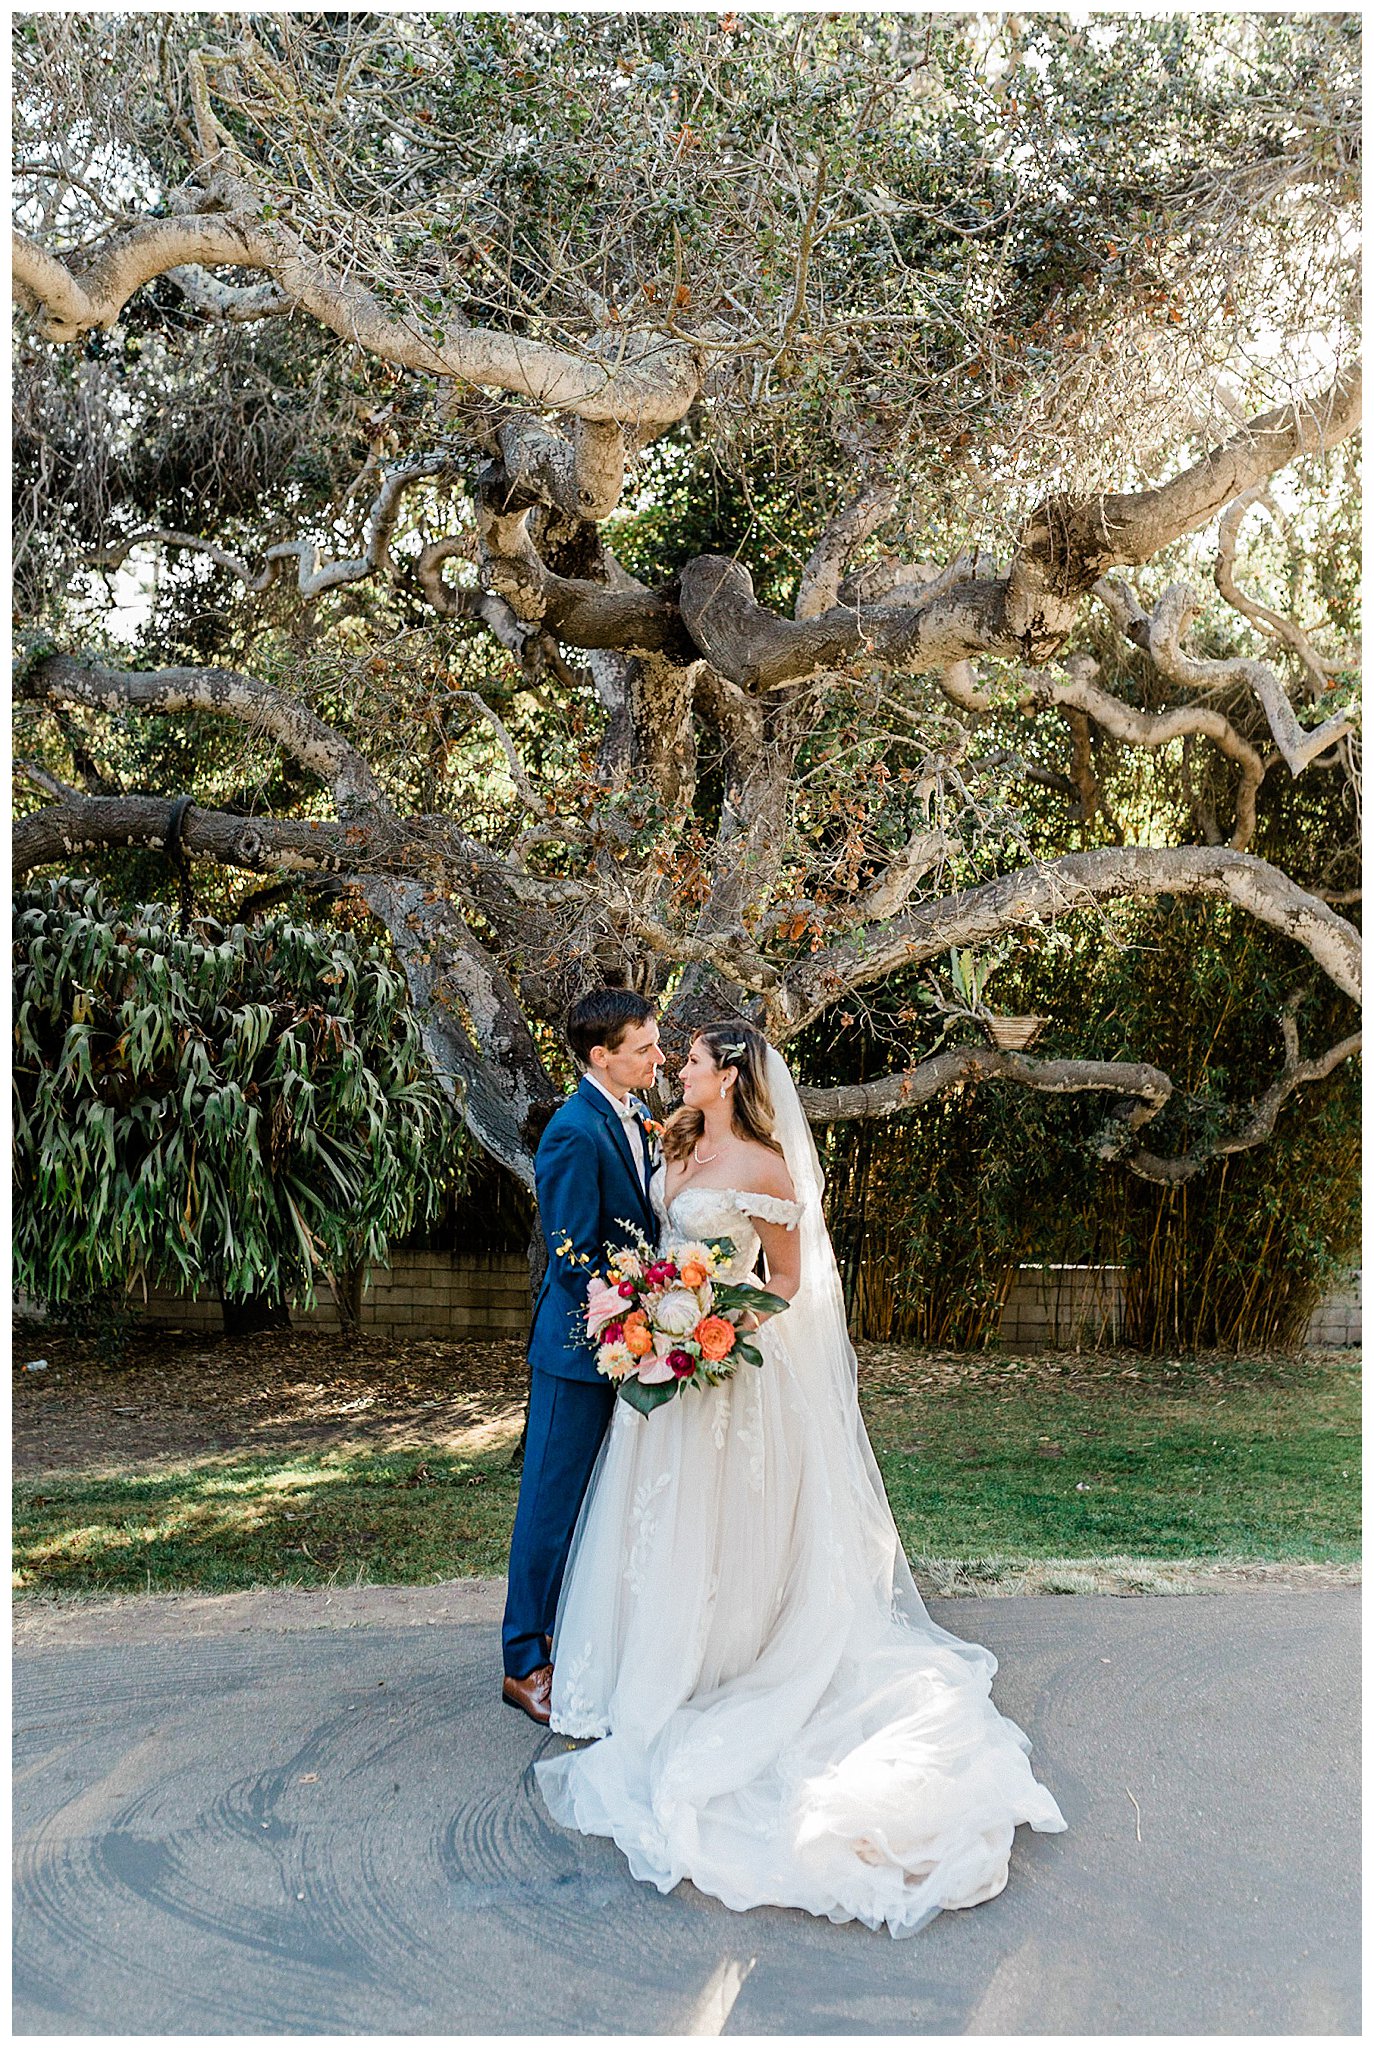 Birde and Groom look lovingly at each other during Sunset photos at the Santa Barbara zoo on their wedding day.